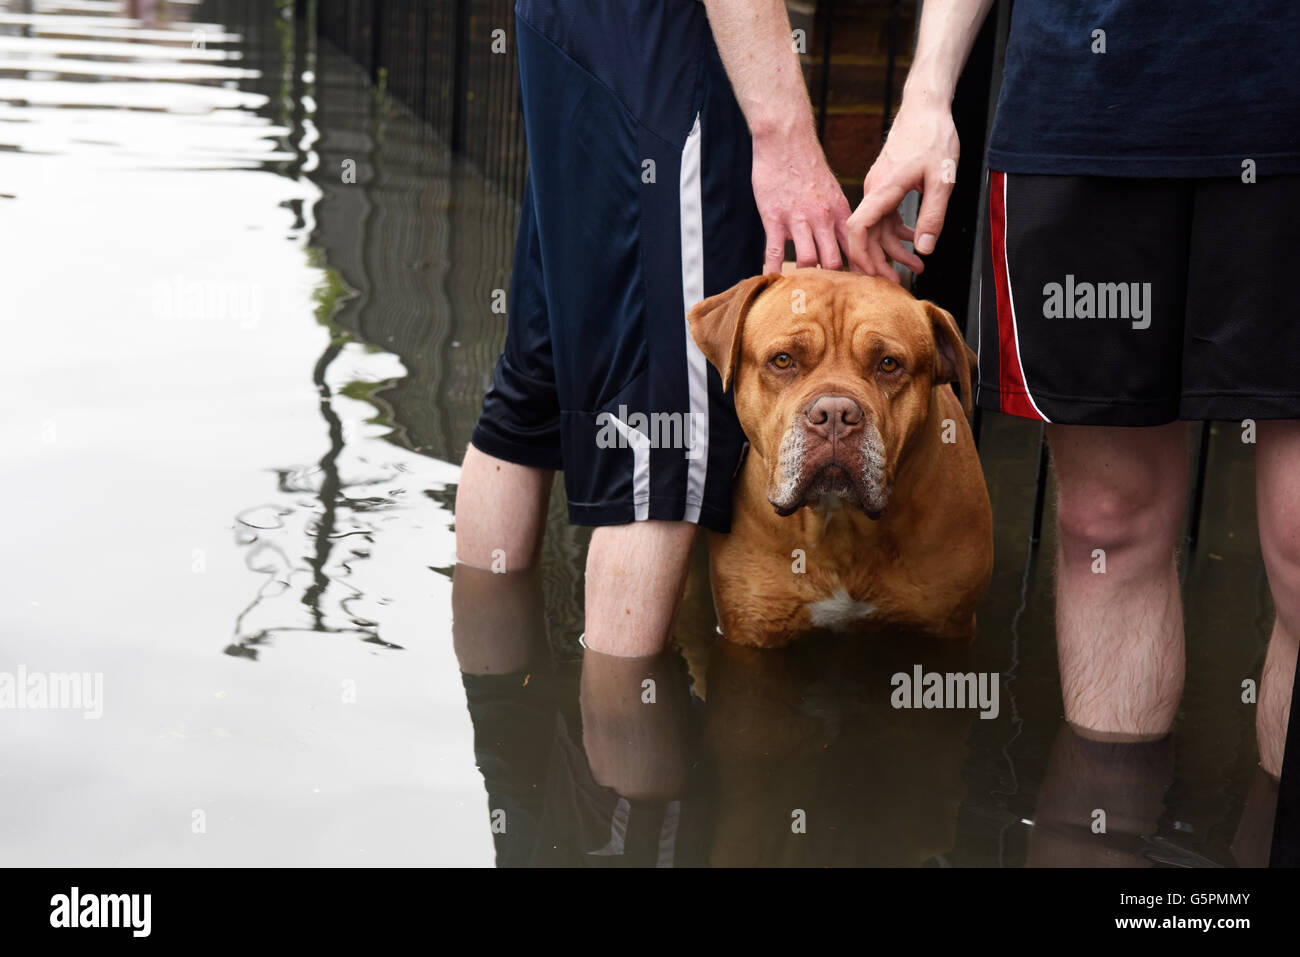 London, UK. 23rd June 2016. UK Weather: Heavy rain causes flooding in East London, Canning Town. Dog standing immersed in water on the flooded road. Credit:  ZEN - Zaneta Razaite / Alamy Live News Stock Photo